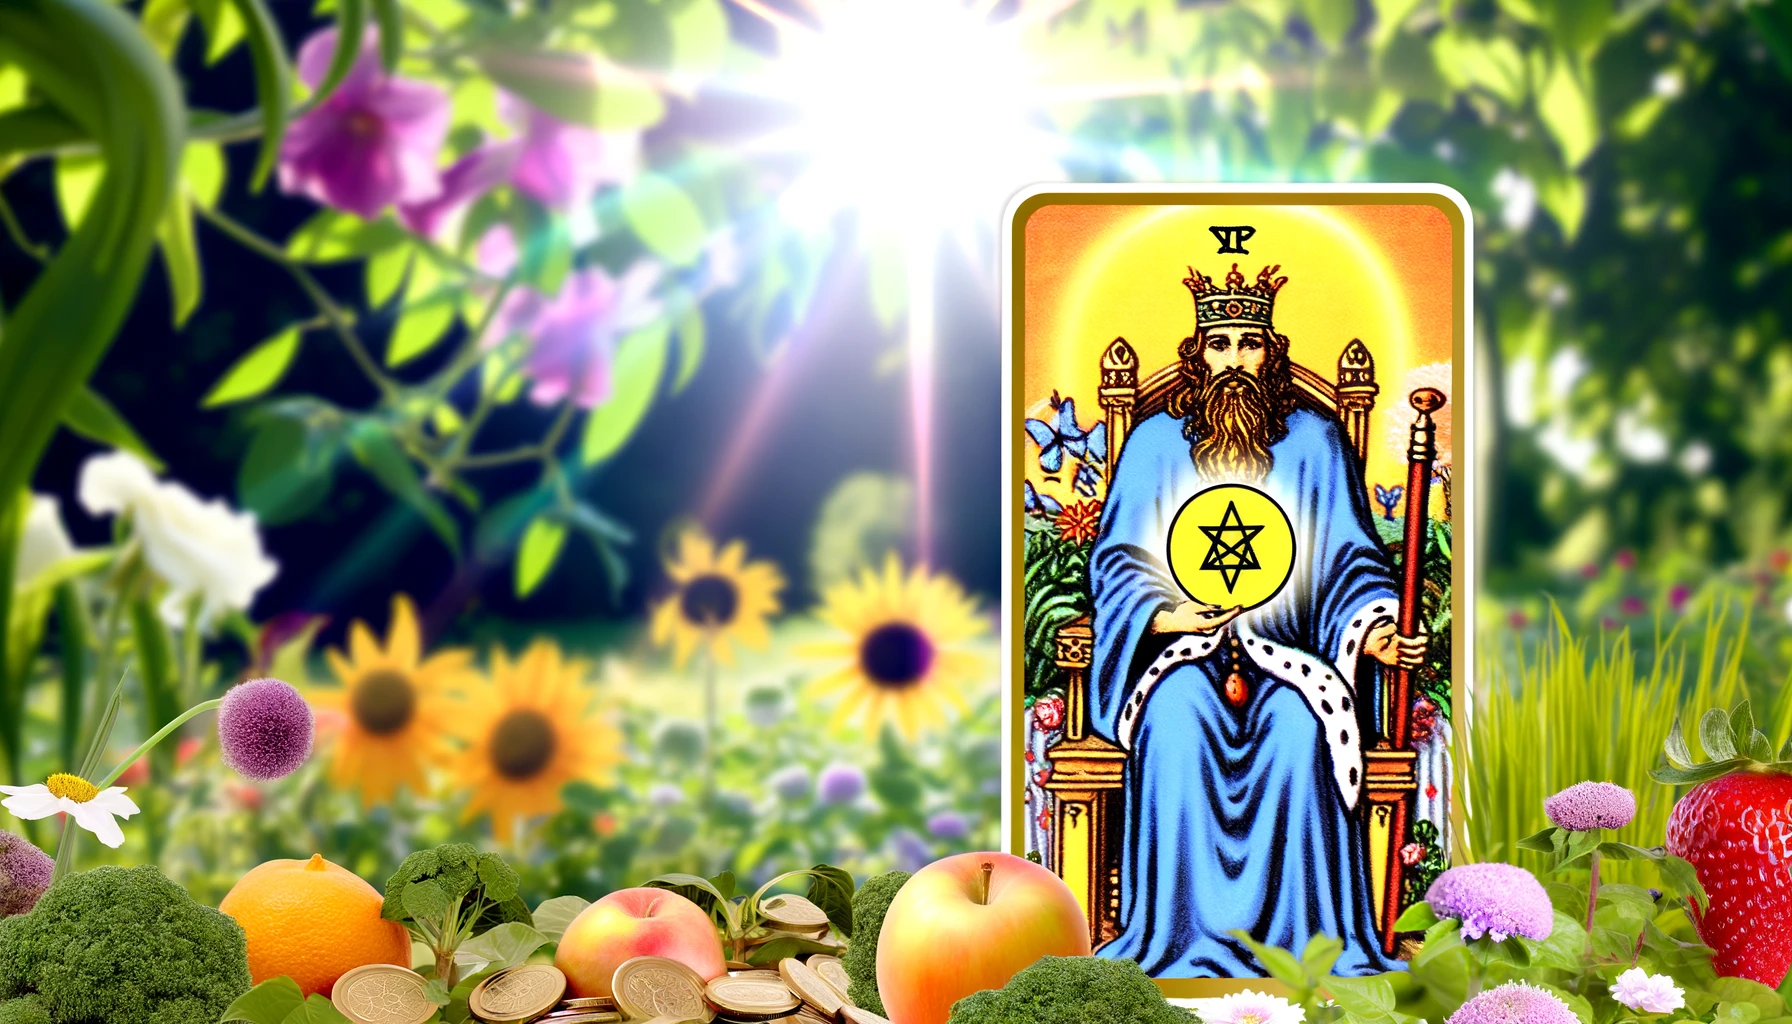 The image depicts the King of Pentacles sitting confidently on his throne, exuding an air of authority and assurance. His posture is upright, and his expression reflects determination and decisiveness. Surrounding him are symbols of wealth and abundance, reinforcing his status as a figure of prosperity and success. This visual conveys the essence of decisiveness and positivity associated with the King of Pentacles in a tarot reading, offering viewers a clear and optimistic perspective on their queries.